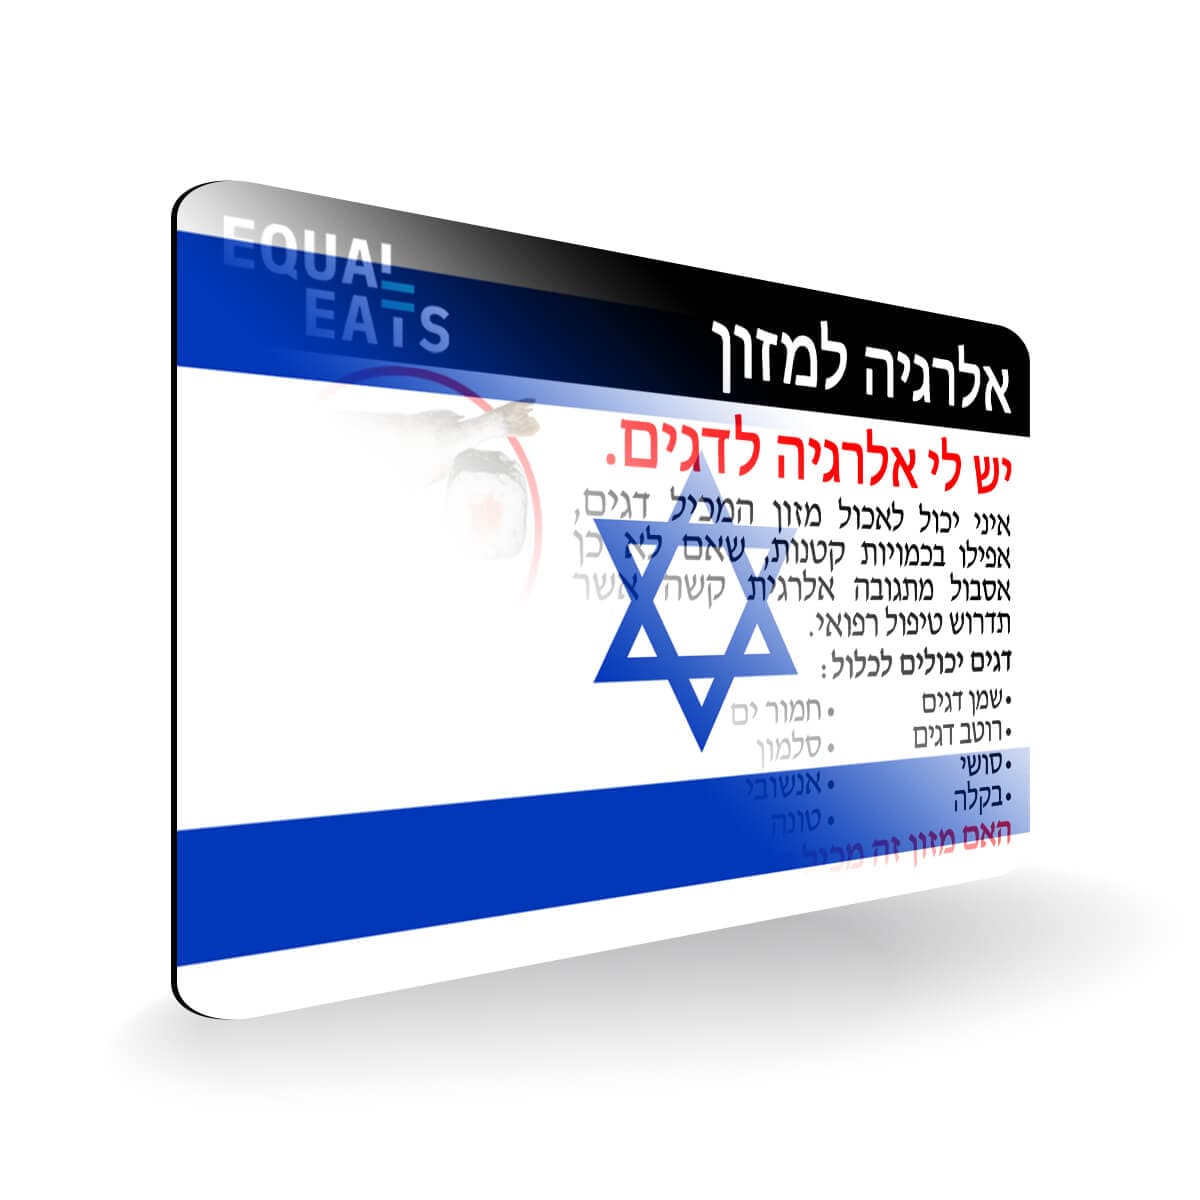 Fish Allergy in Hebrew. Fish Allergy Card for Israel